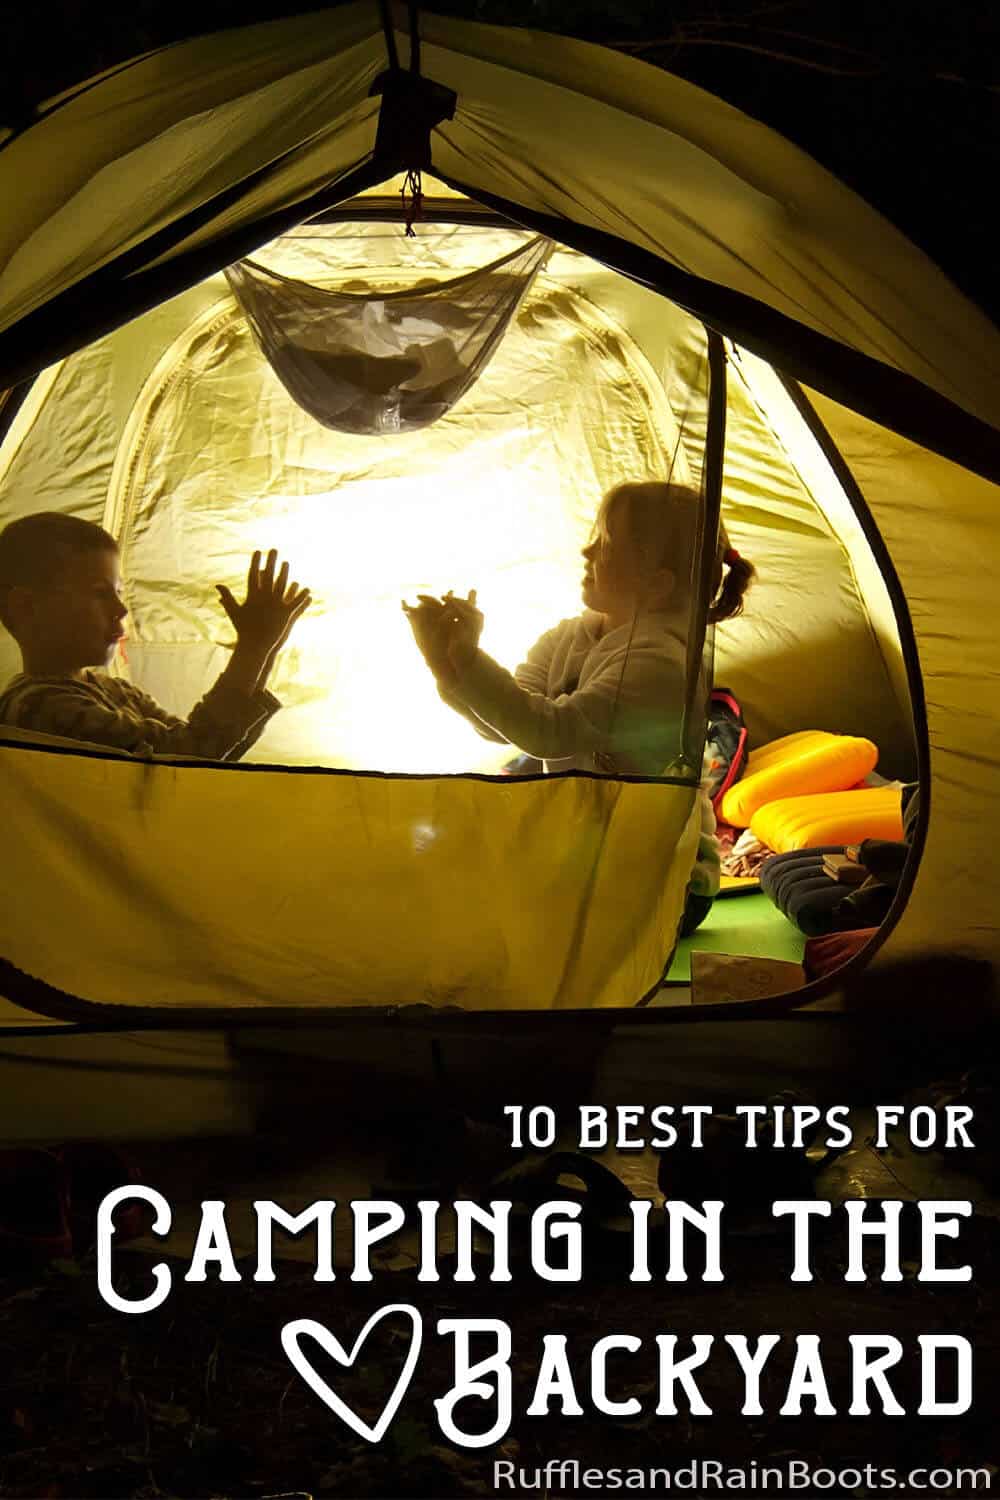 backyard campout tips and tricks with text which reads 10 best tips for camping in the backyard